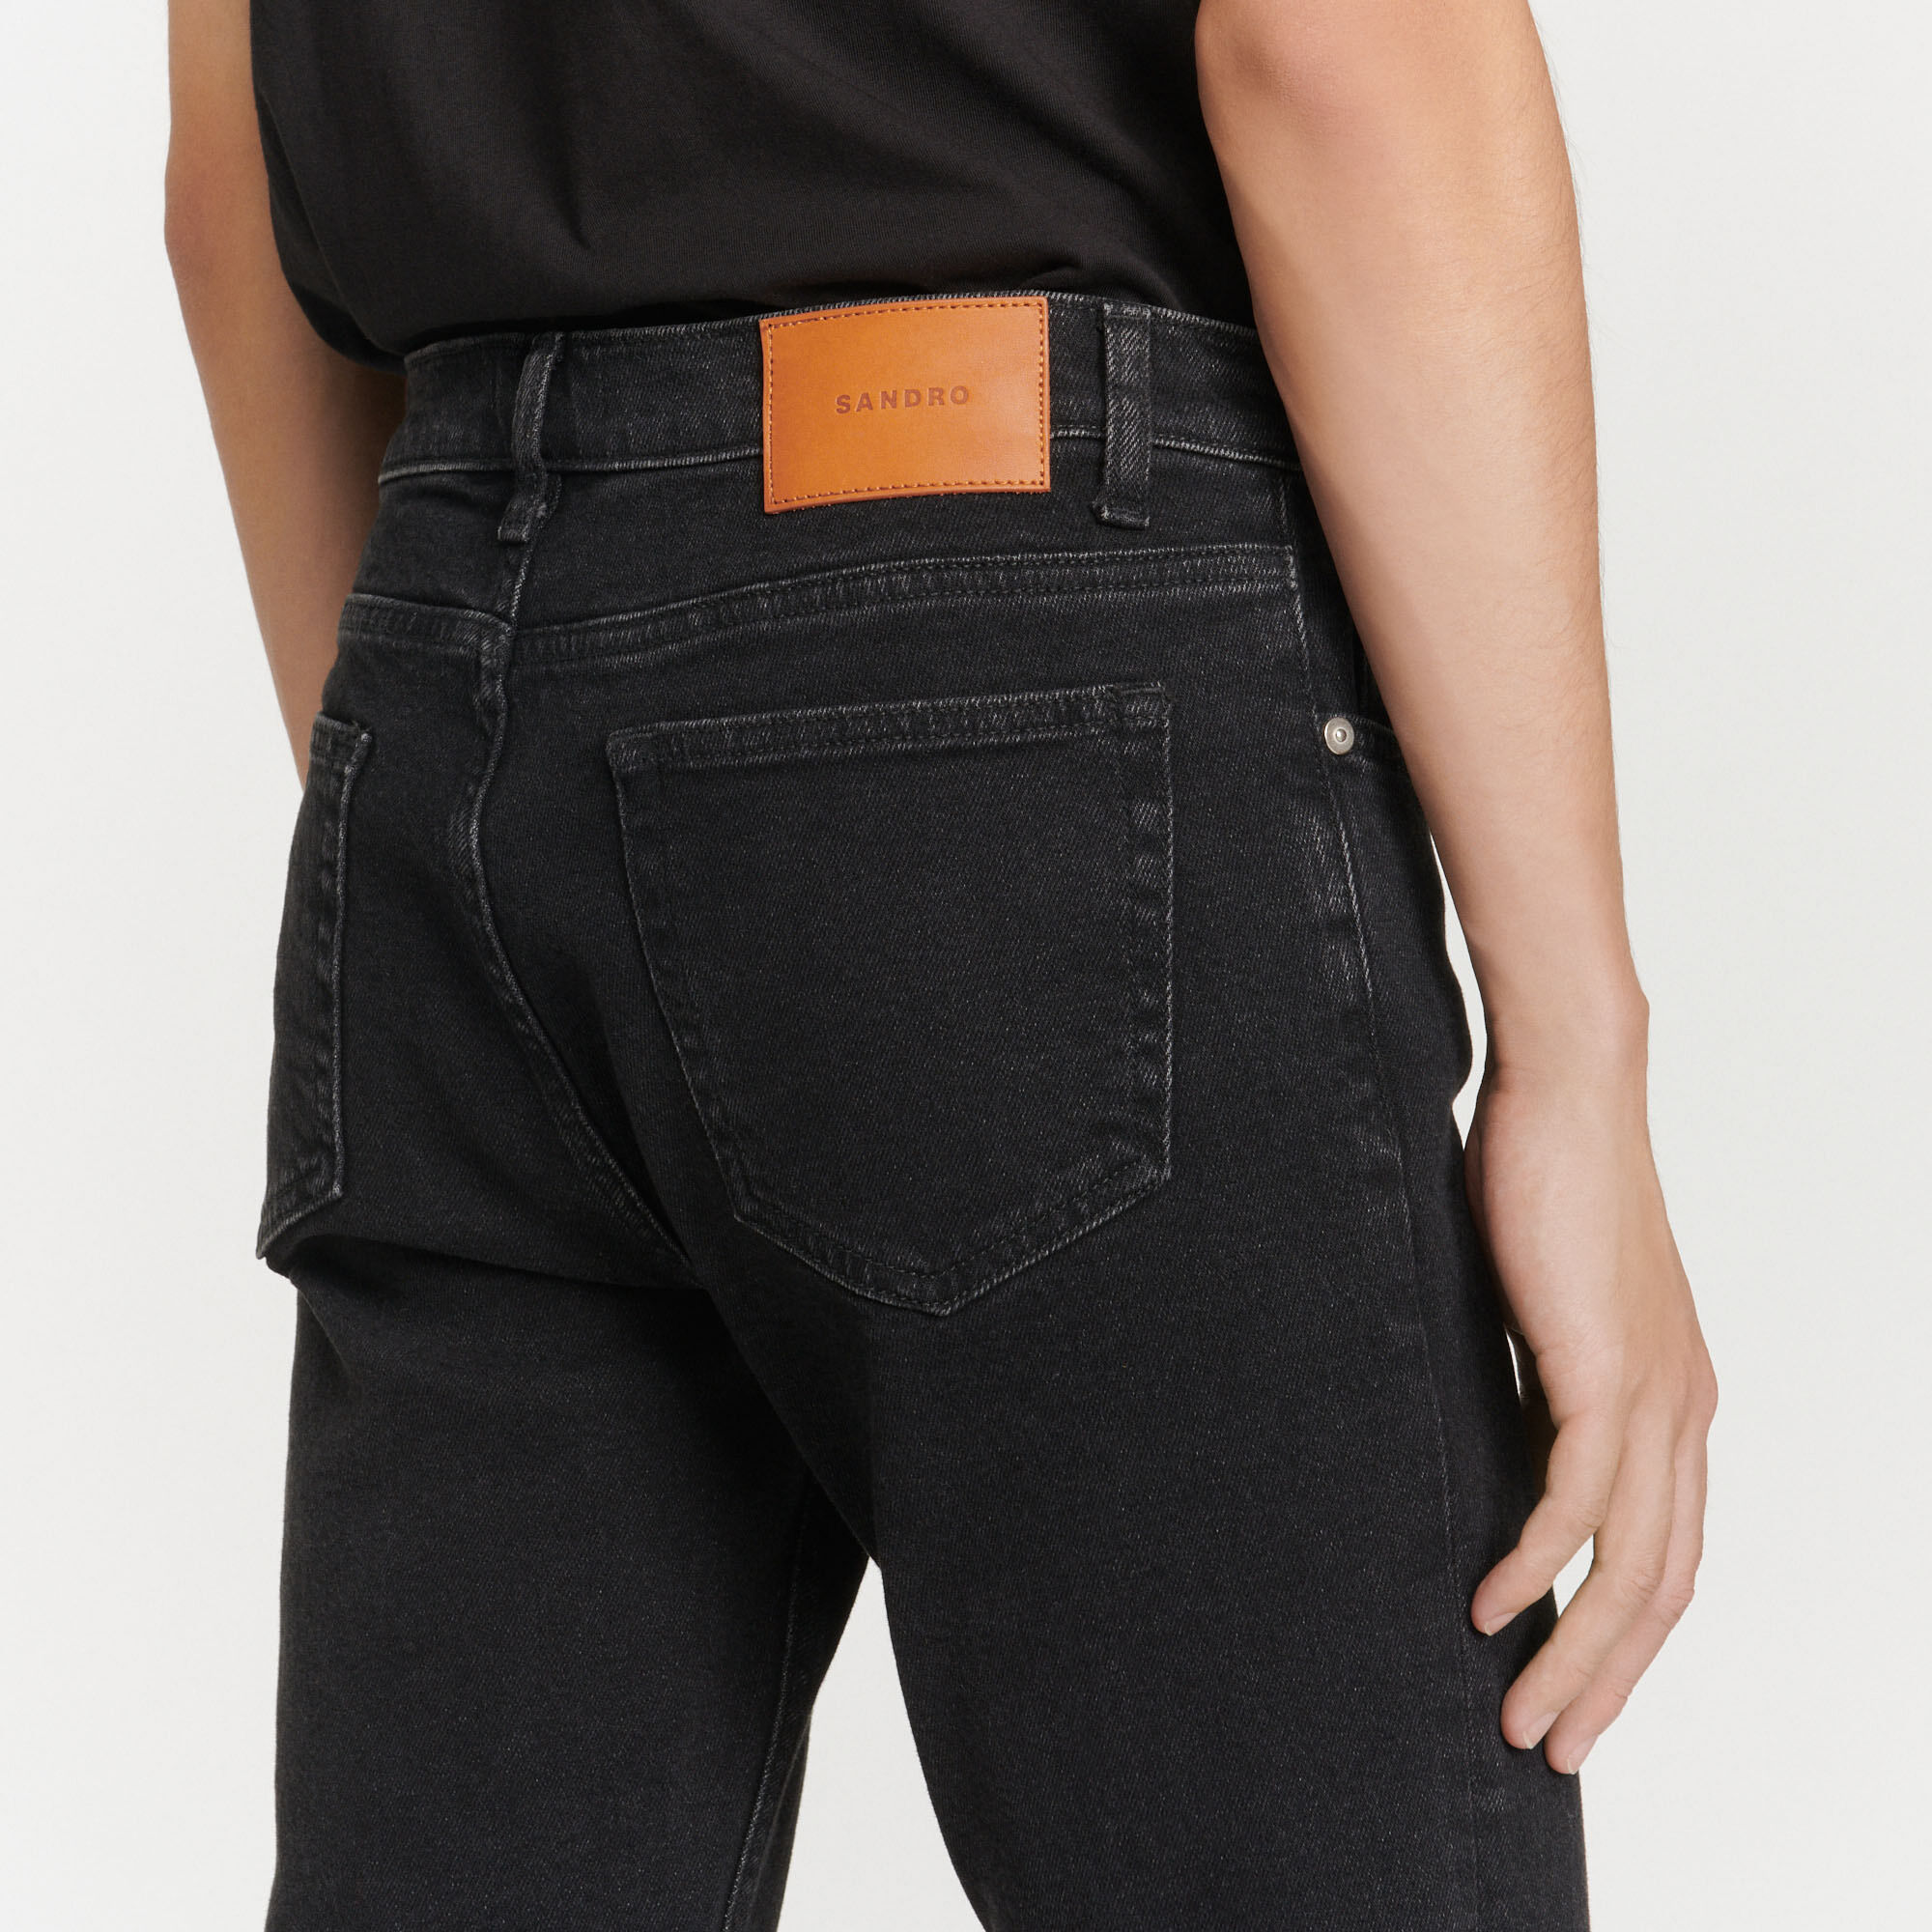 Black jeans - Slim cut Select a size and Login to add to Wish list